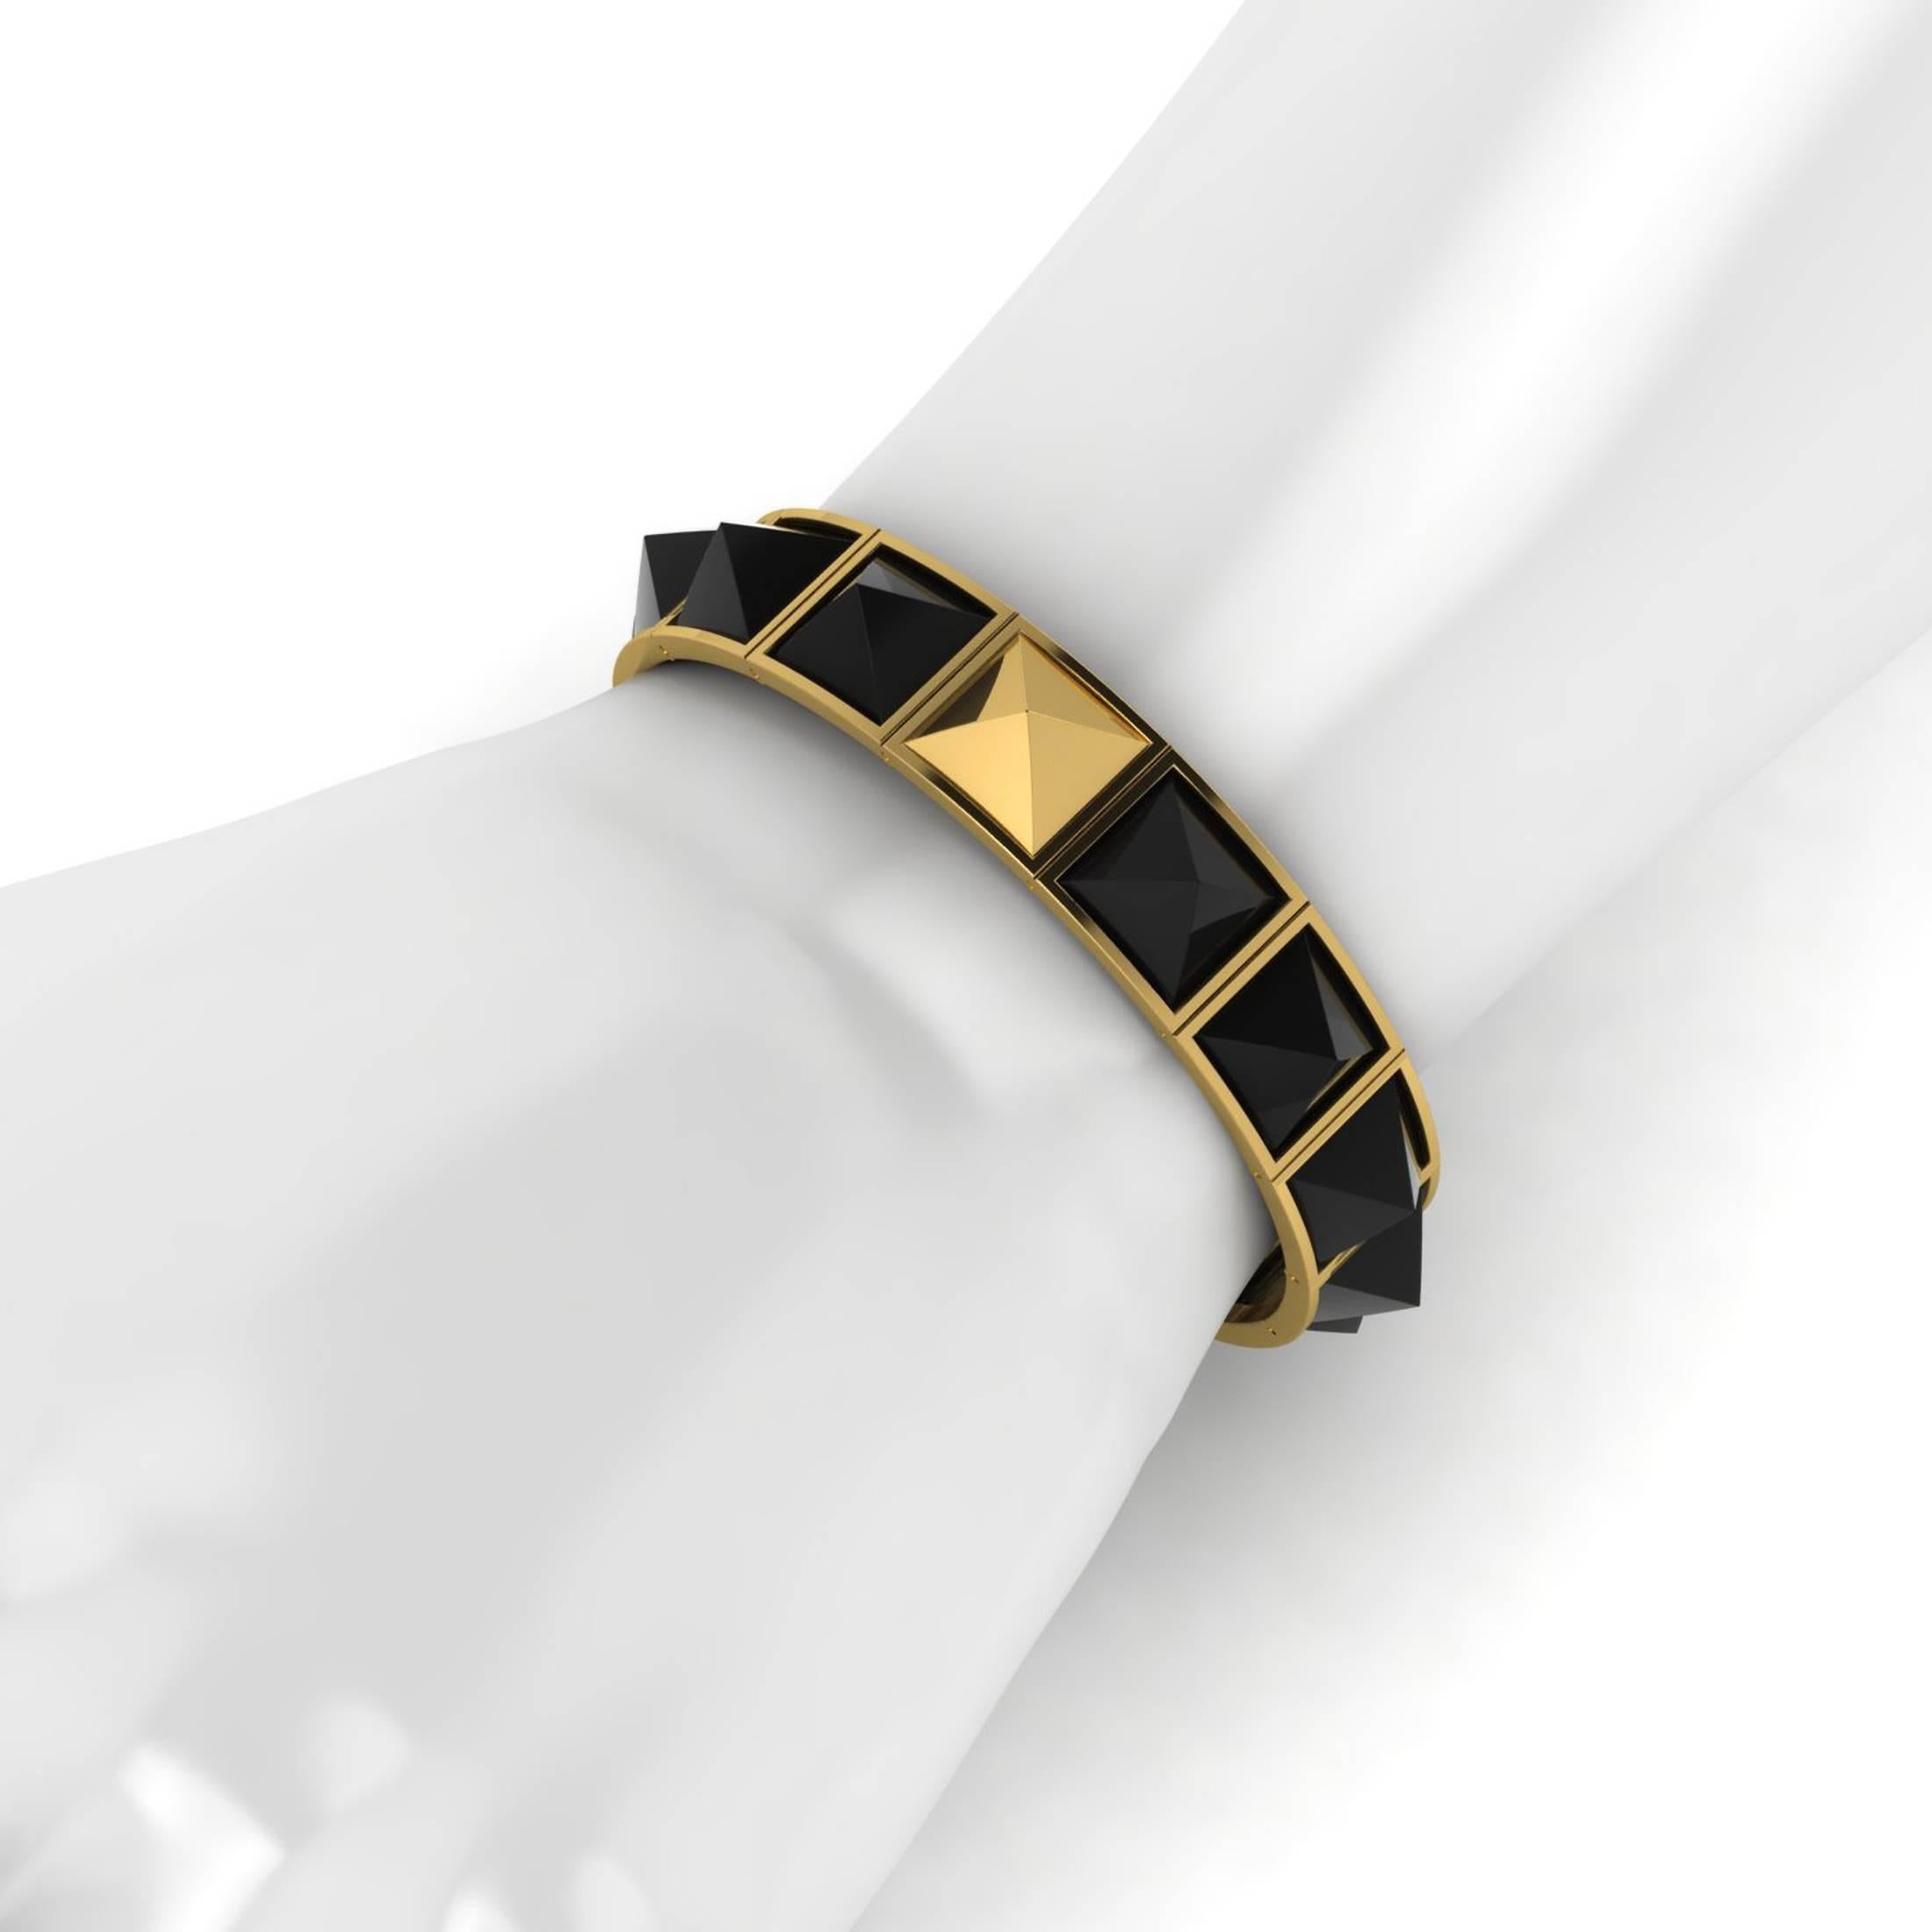 Black Pyramids shape Onyx, specifically cut to measure for this special design, each onyx is selected to have the maximum shine and dark color, set in an hand made in New York, bracelet mounting , conveiced in 18k yellow gold, design for the best